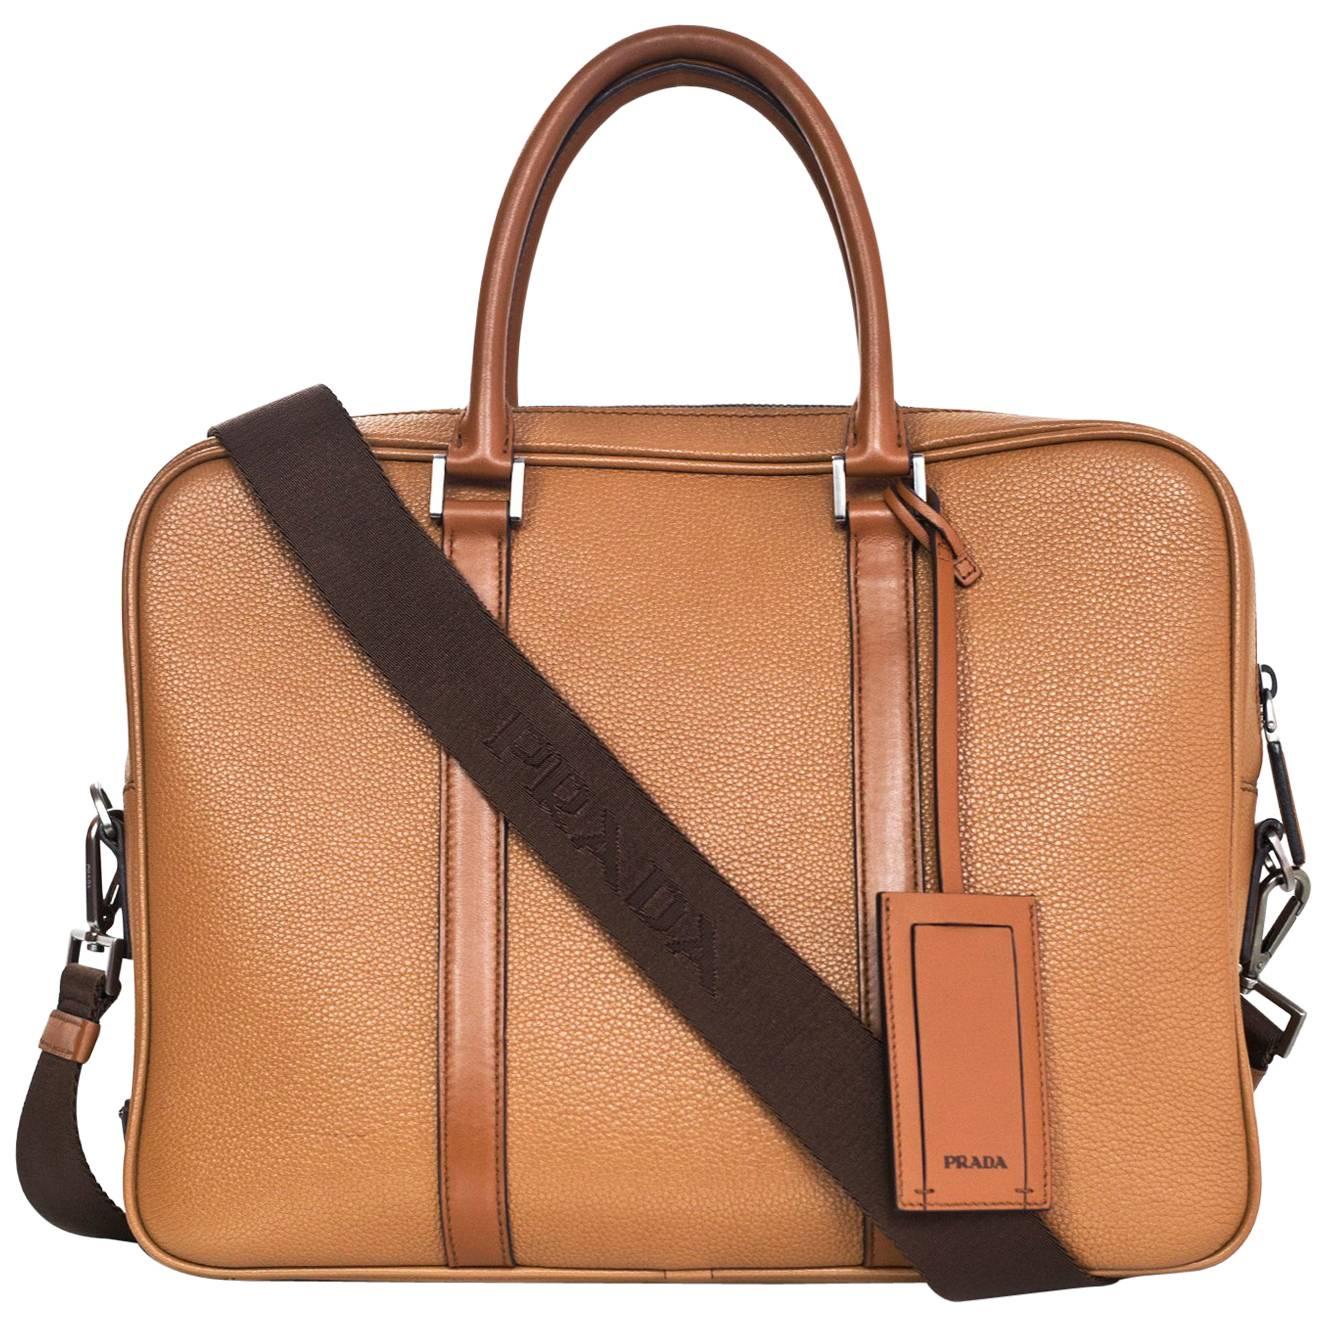 Prada Tan Grained Leather Briefcase/Laptop Bag with Strap rt. $2, 200